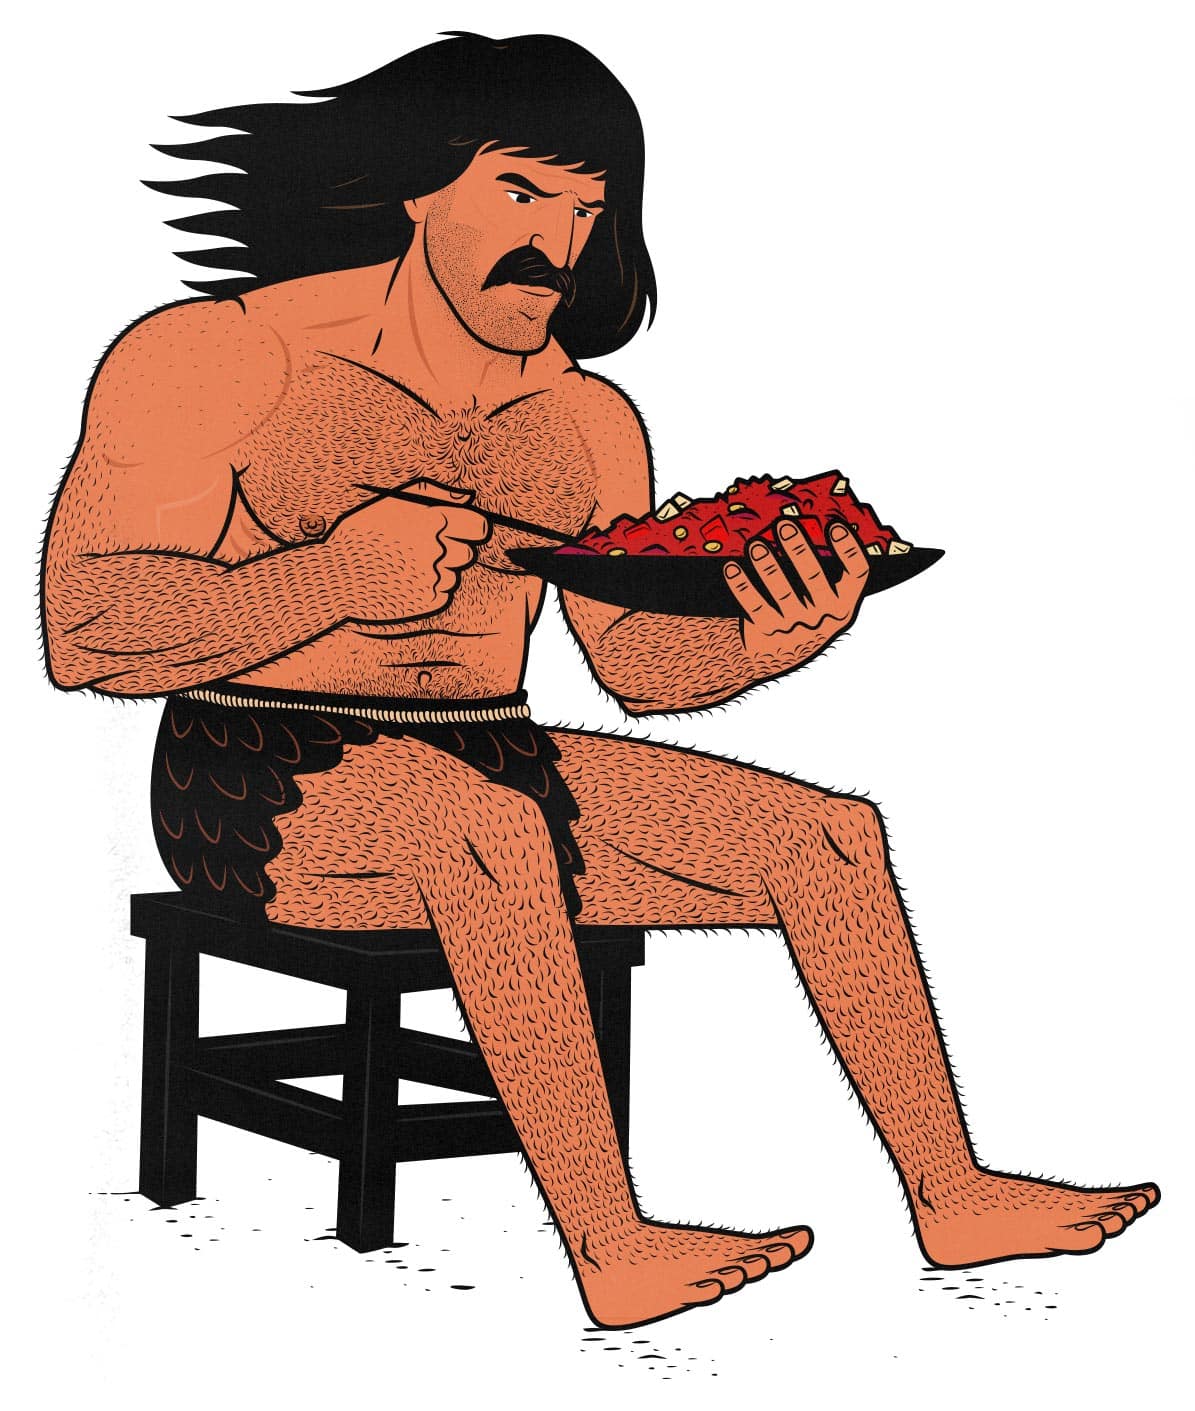 A man eating a big bulking diet to gain weight quickly. Illustrated by Shane Duquette.